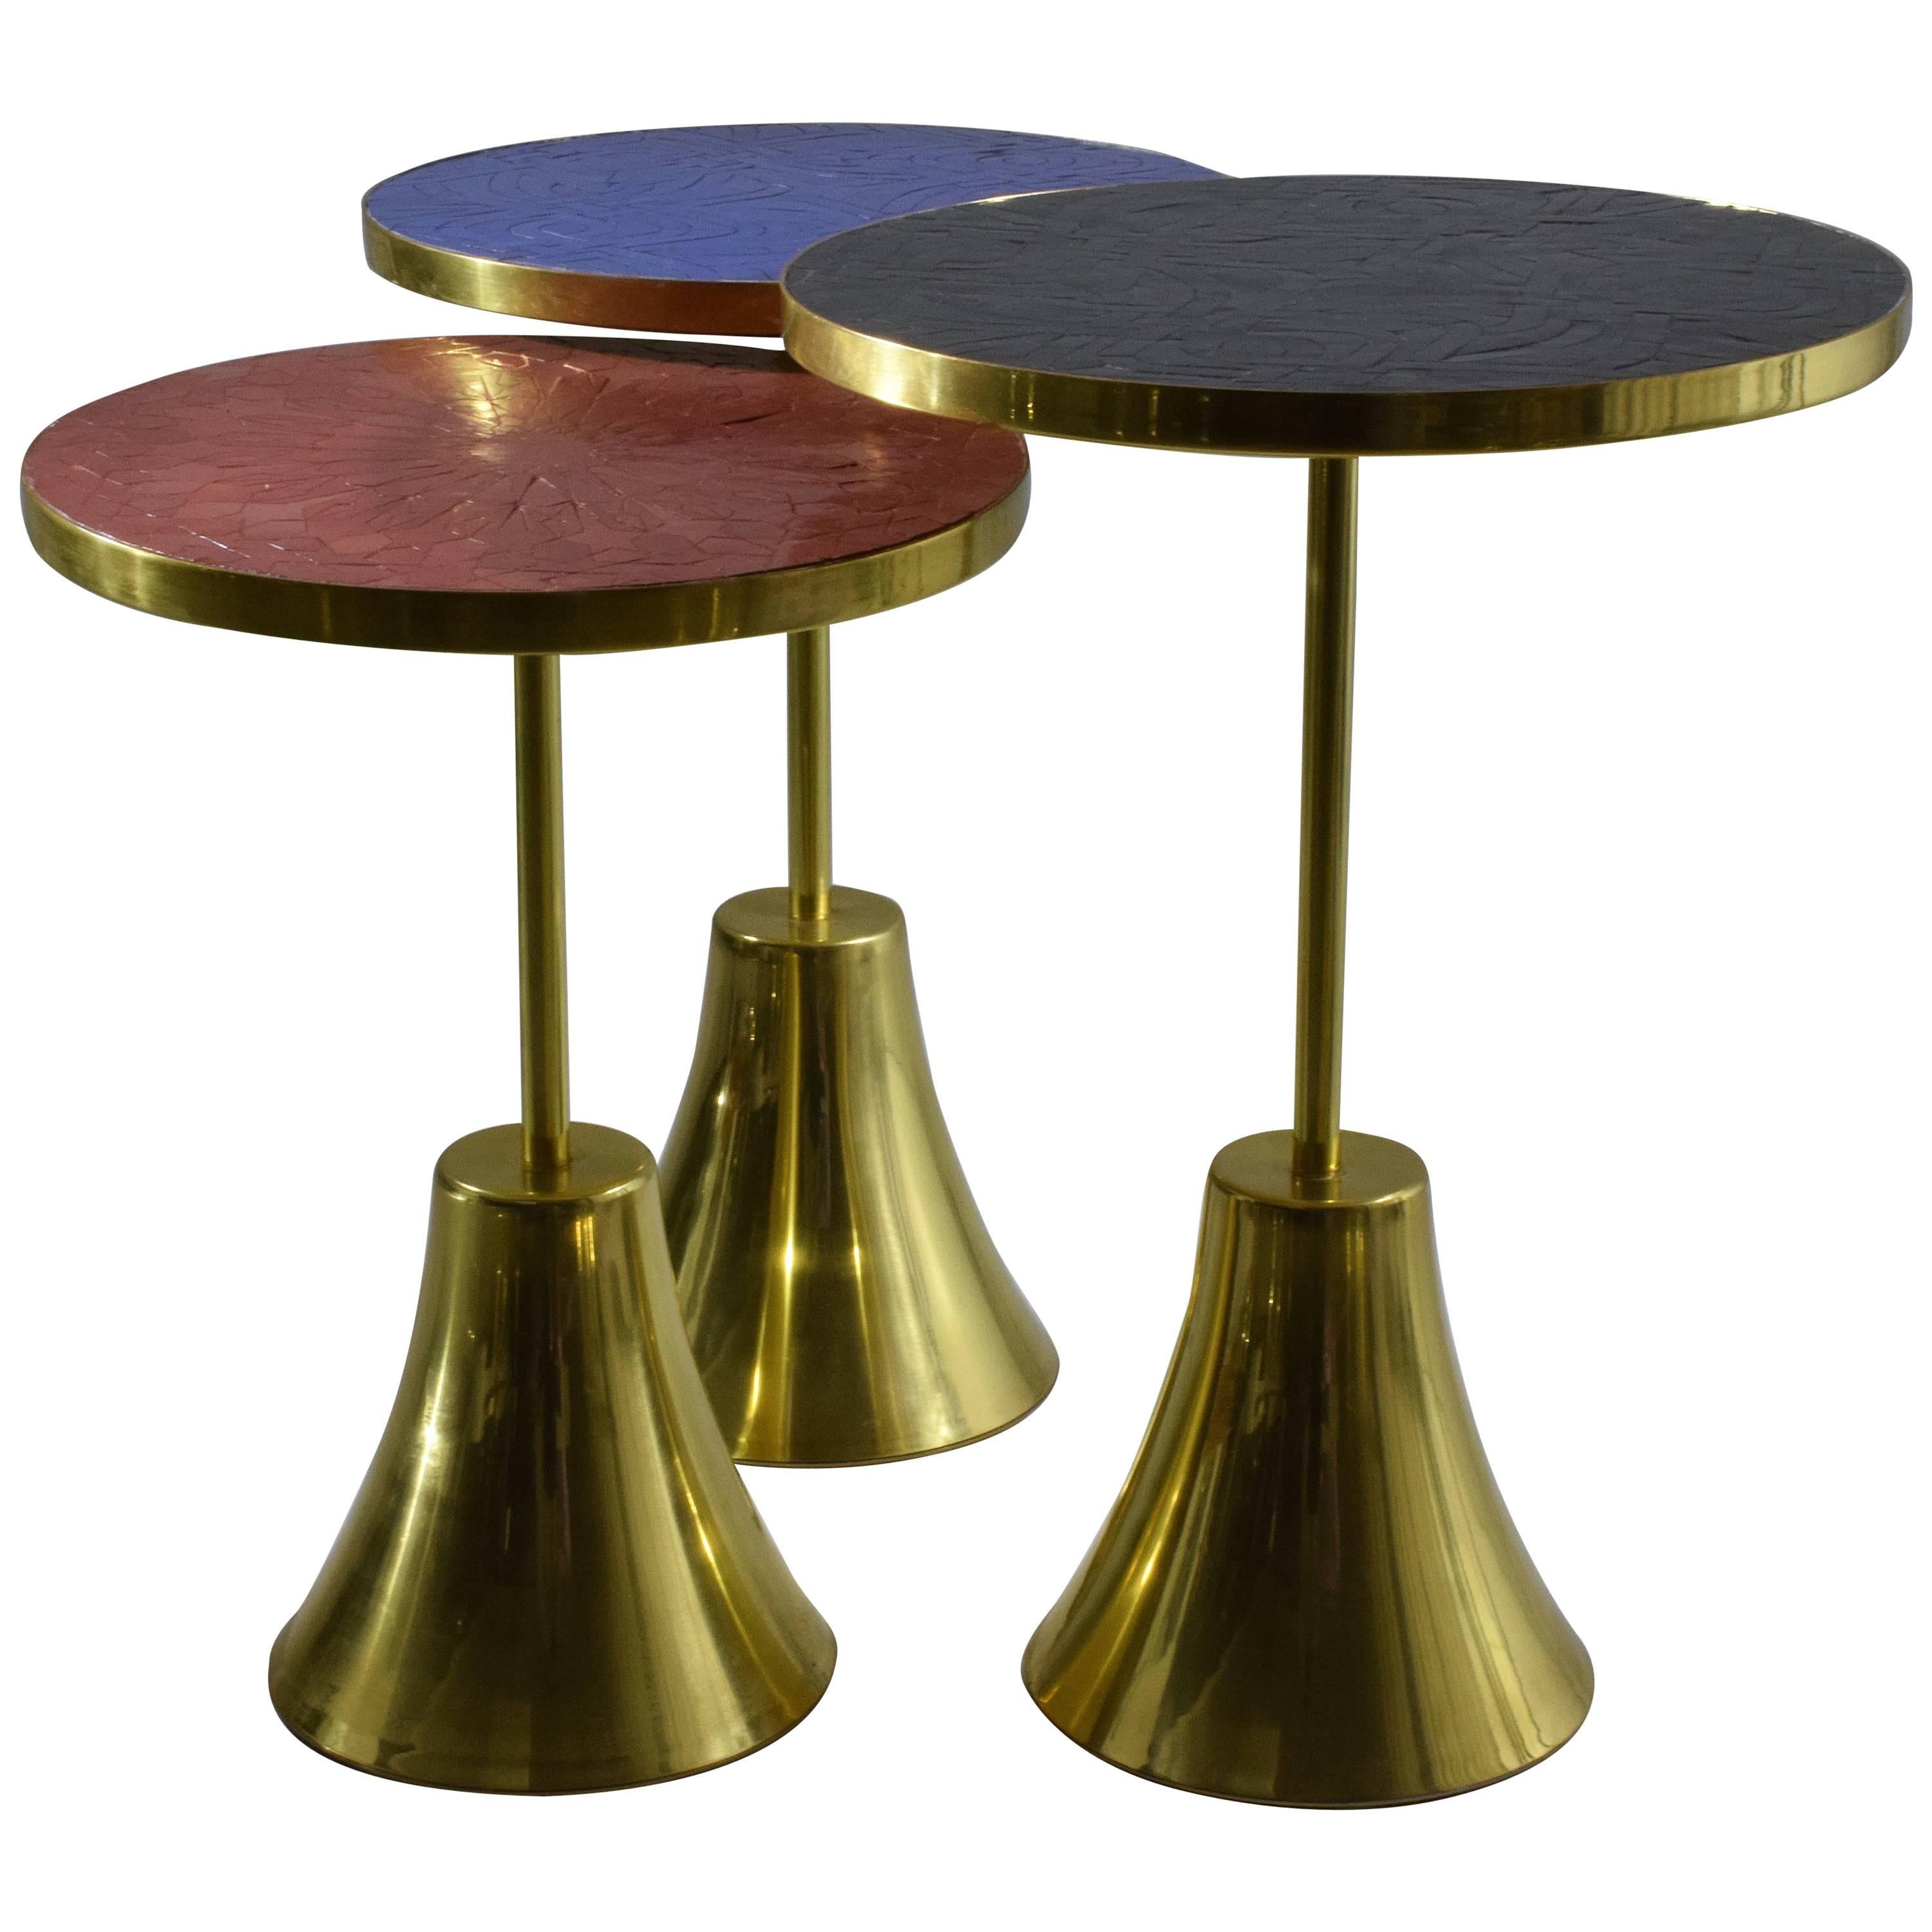 Set of three contemporary handcrafted guéridon side or end nesting tables composed of a solid brass structure and designed with two intricate mosaic tile tabletop zellige designs handmade with expert workmanship by Moroccan artisans. This set of